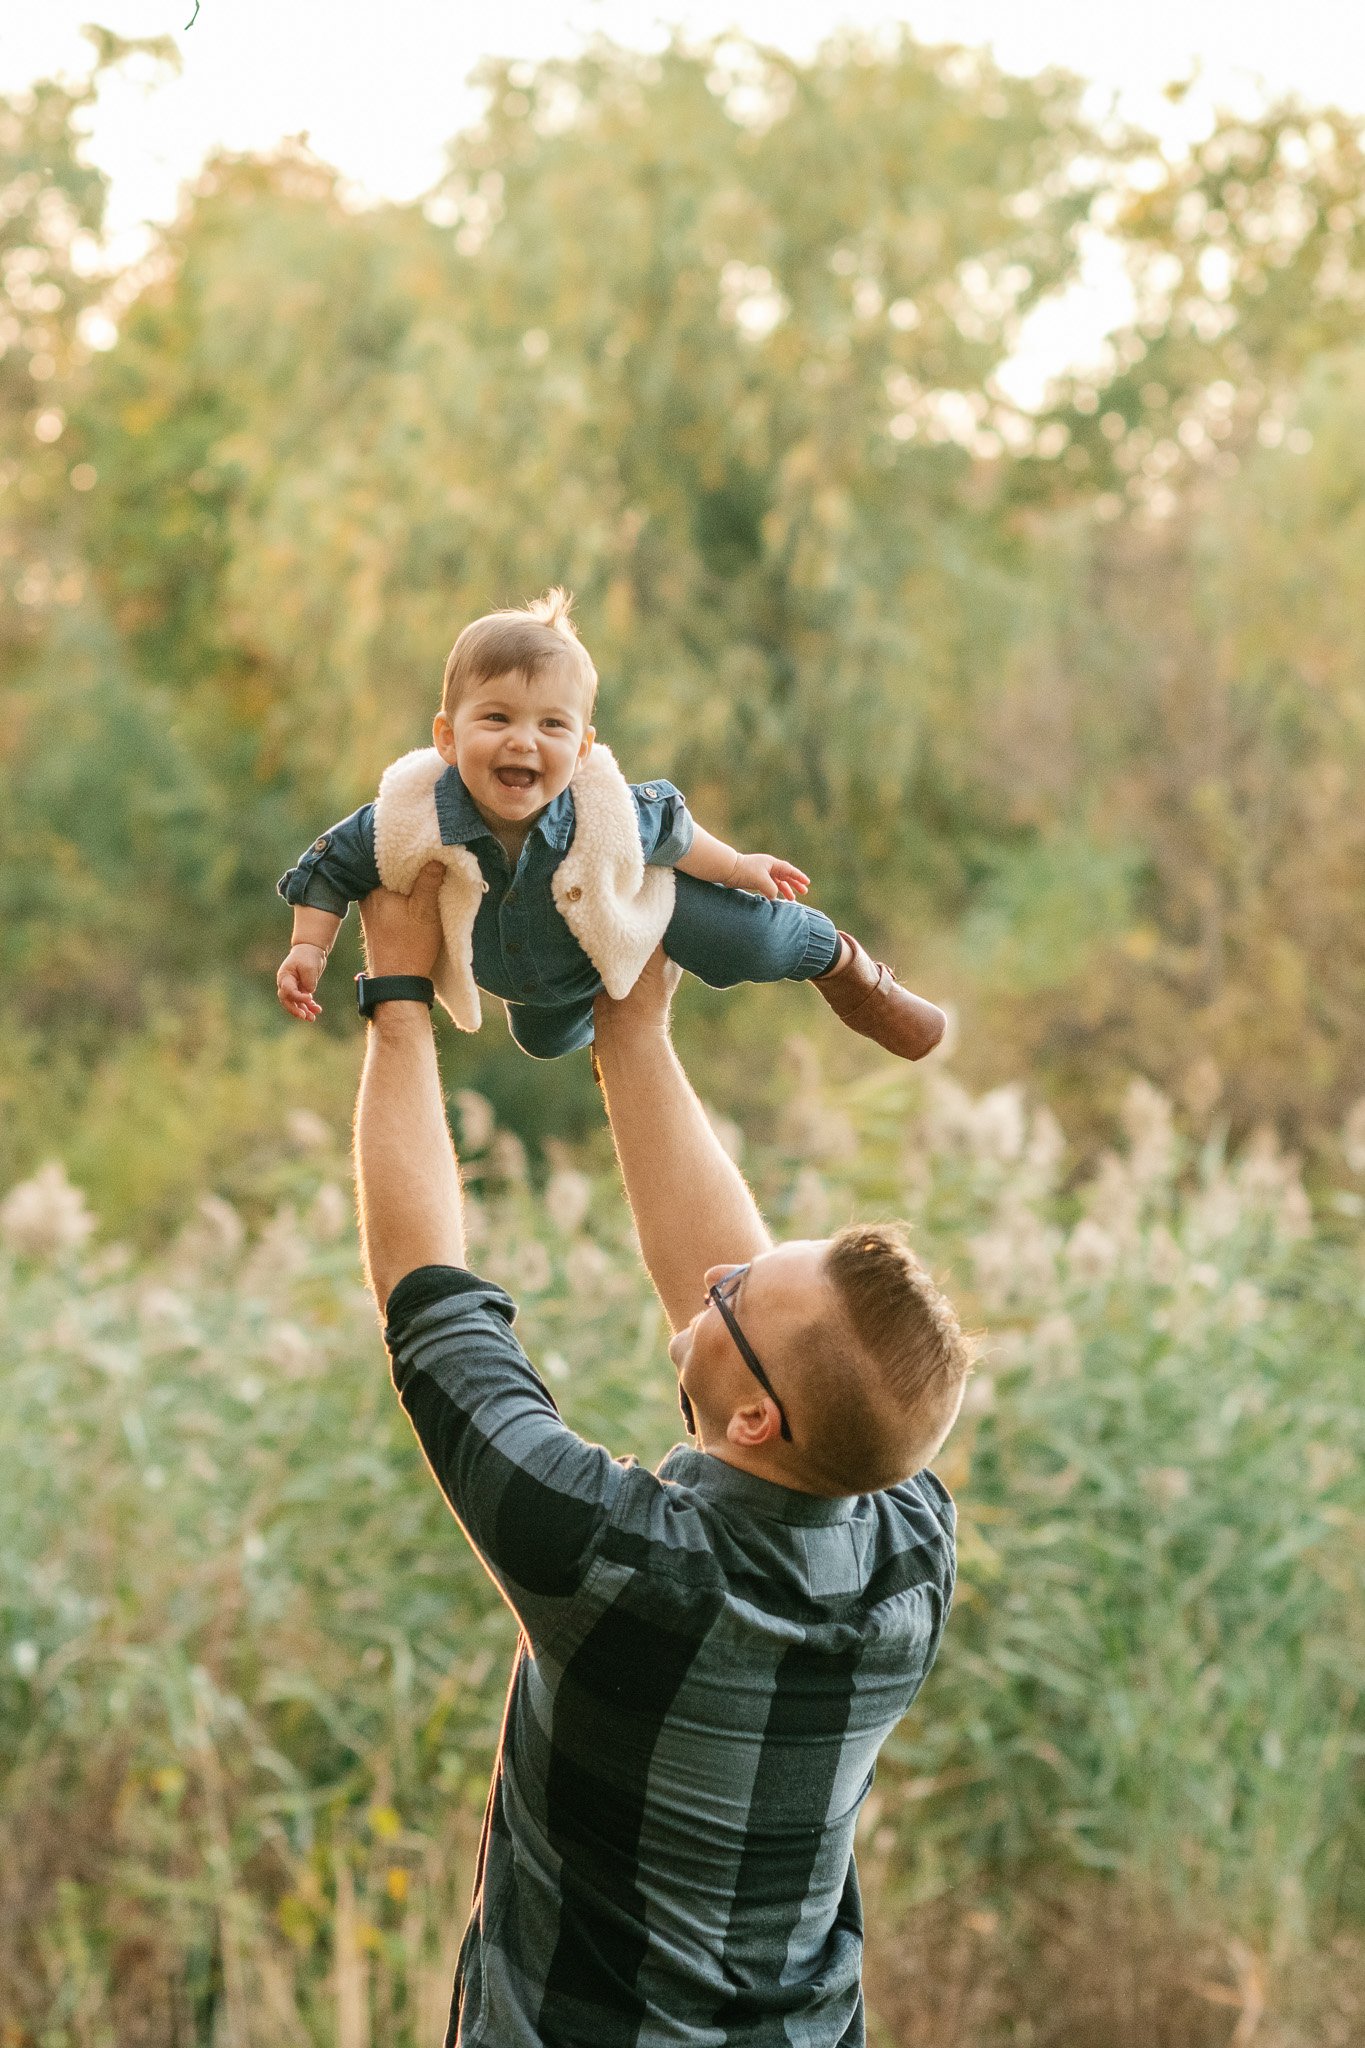  A New Jersey photographer captures an authentic smile of a baby playing with her dad by Nicole Hawkins Photography. authentic pics #NicoleHawkinsPhotography #NicoleHawkinsFamily #fallfamilyphotos #fallphotos #familyphotographerNJ #NJfallfamilypics 